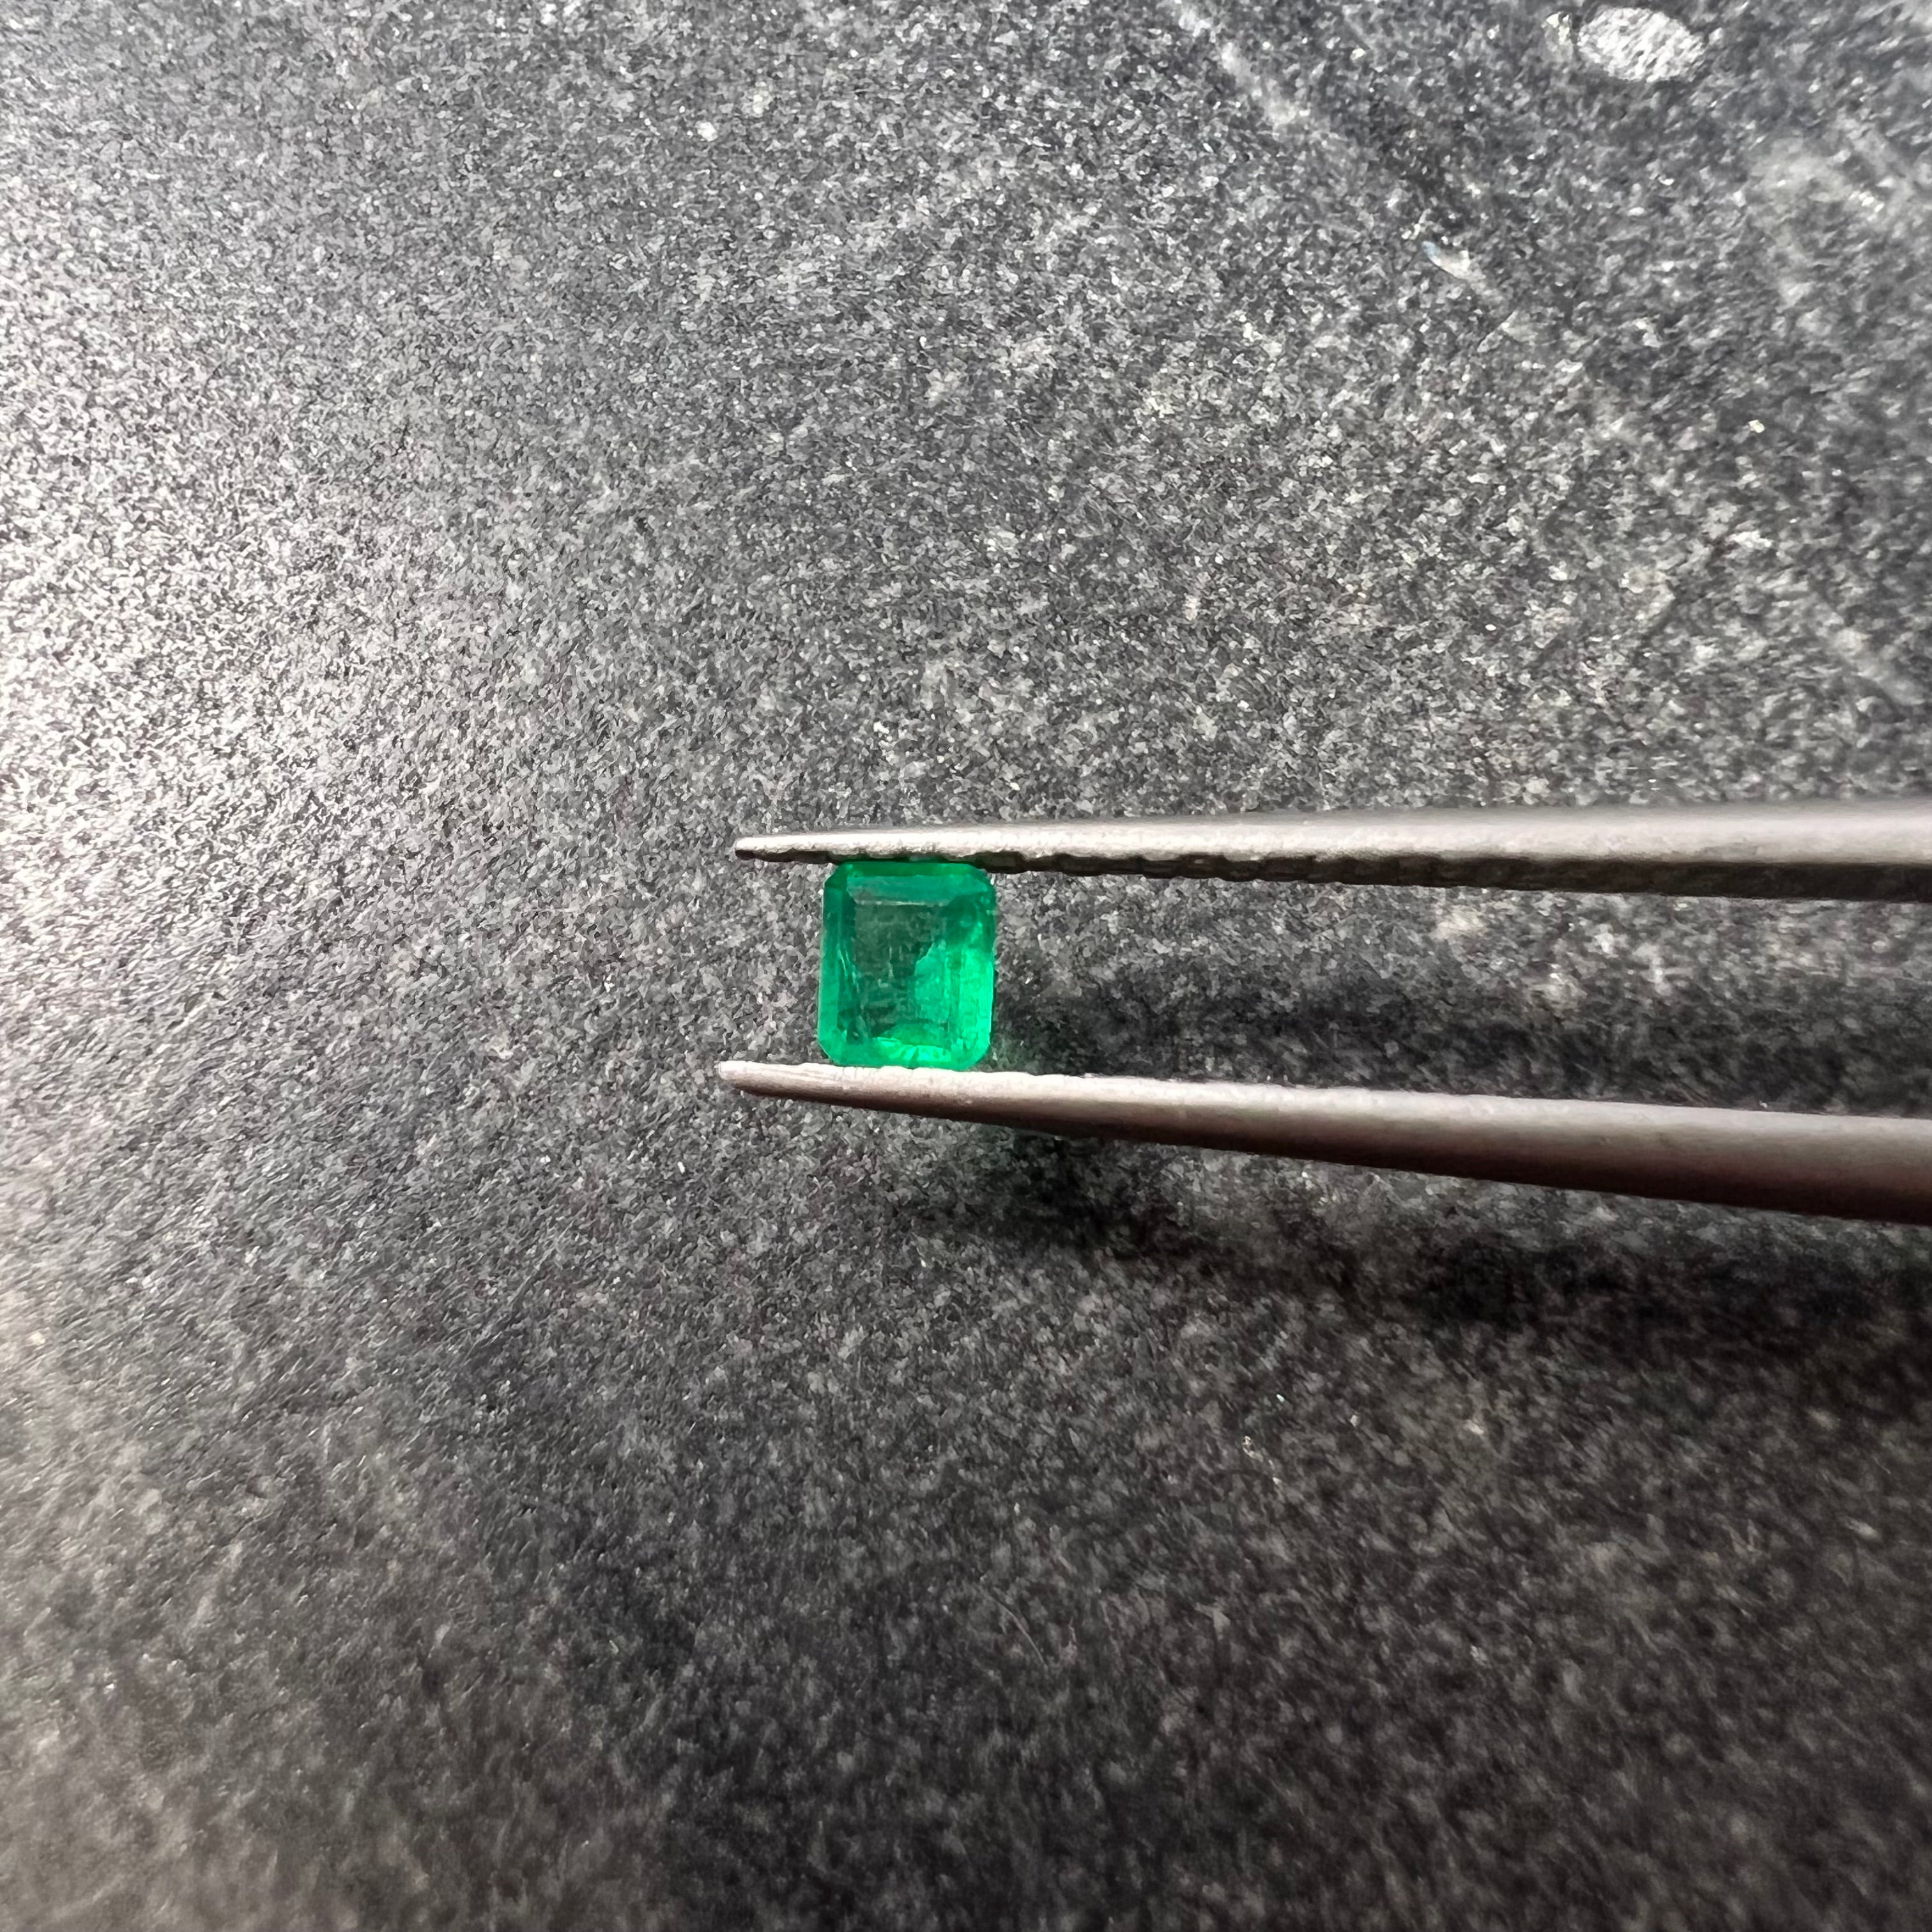 .16CT Loose Natural Colombian Emerald Radiant Cut 3.08x3.55x1.63mm Earth mined Gemstone